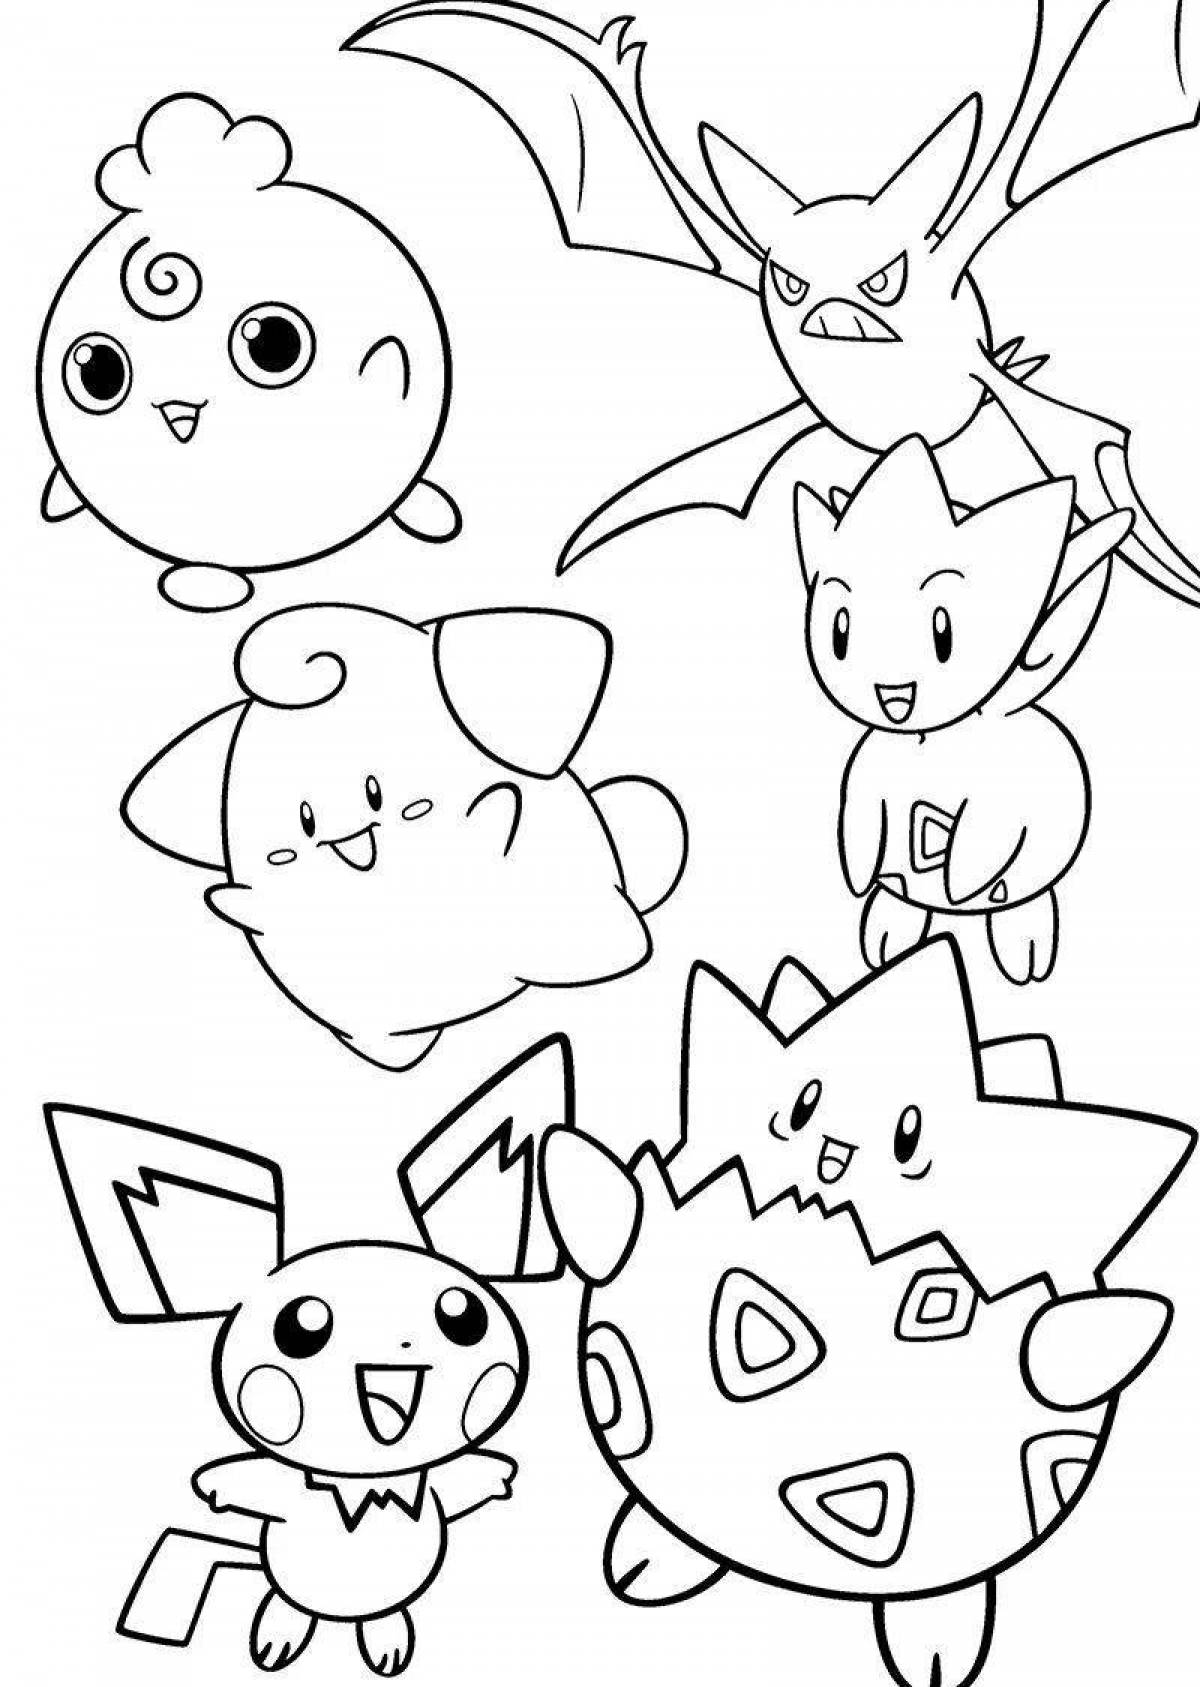 Charming pikachu and his friends